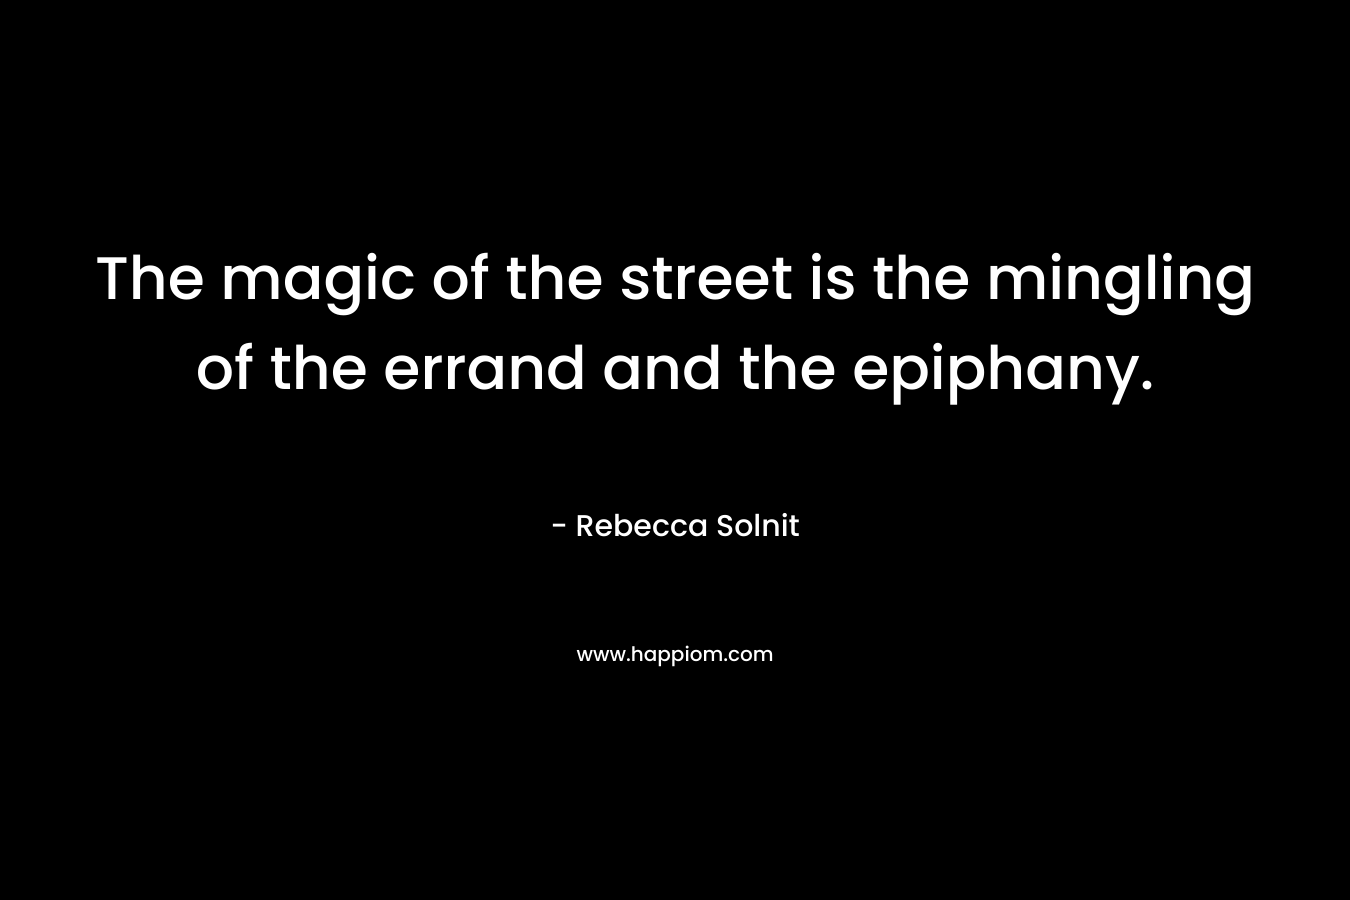 The magic of the street is the mingling of the errand and the epiphany. – Rebecca Solnit